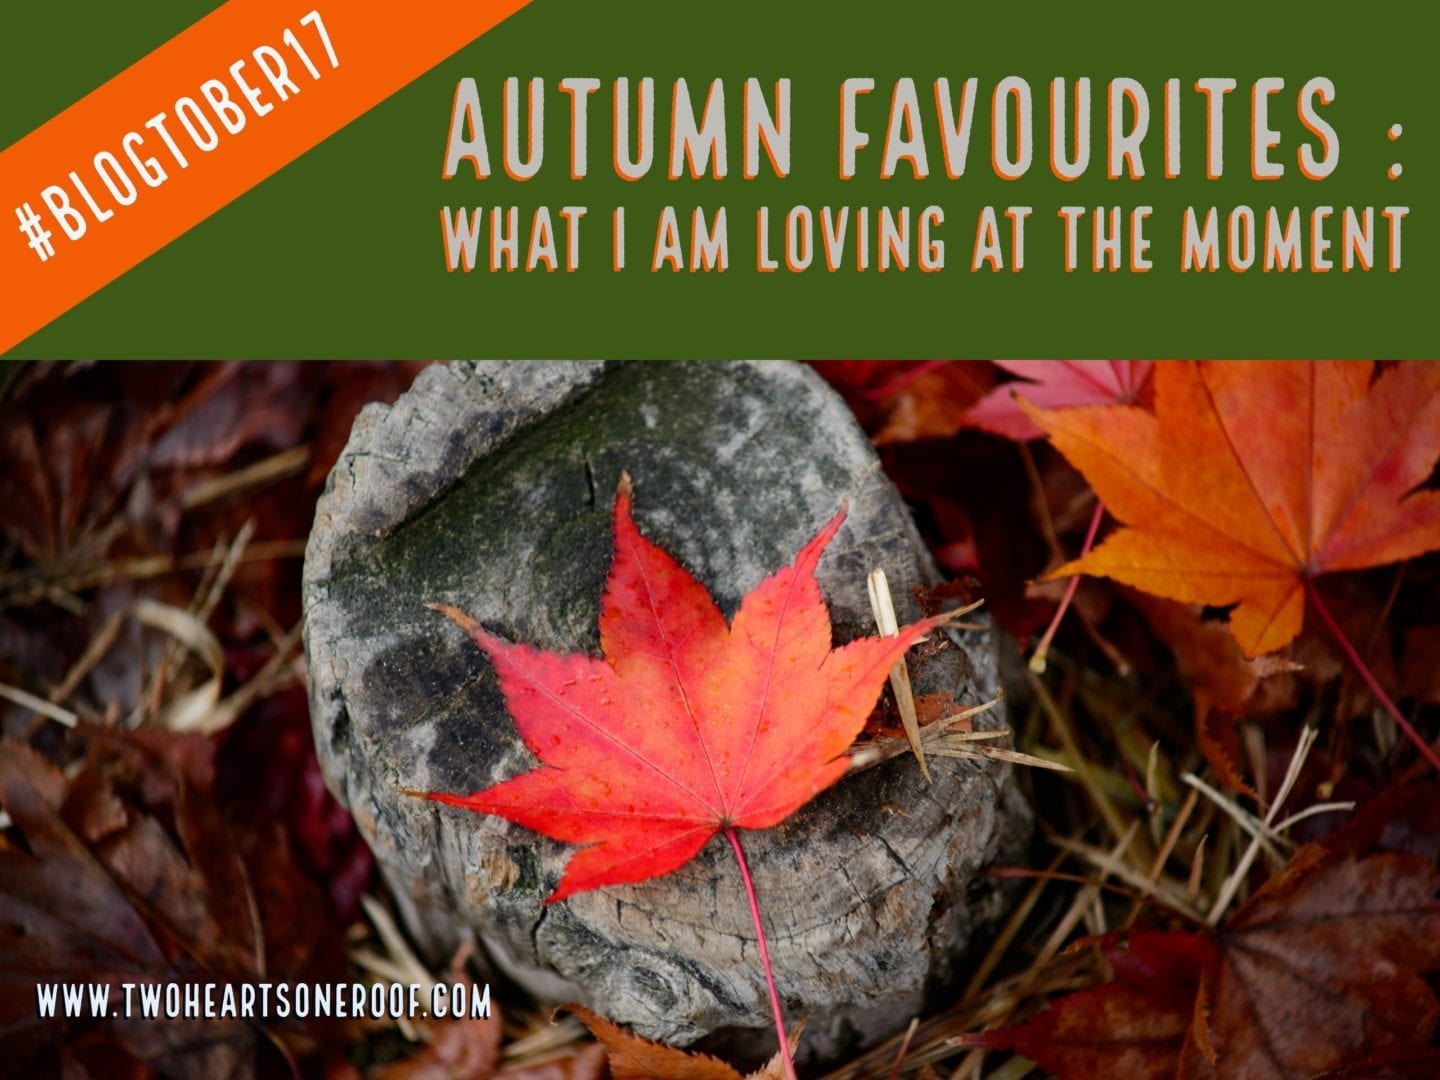 Autumn Favourites – What I am Loving At The Moment